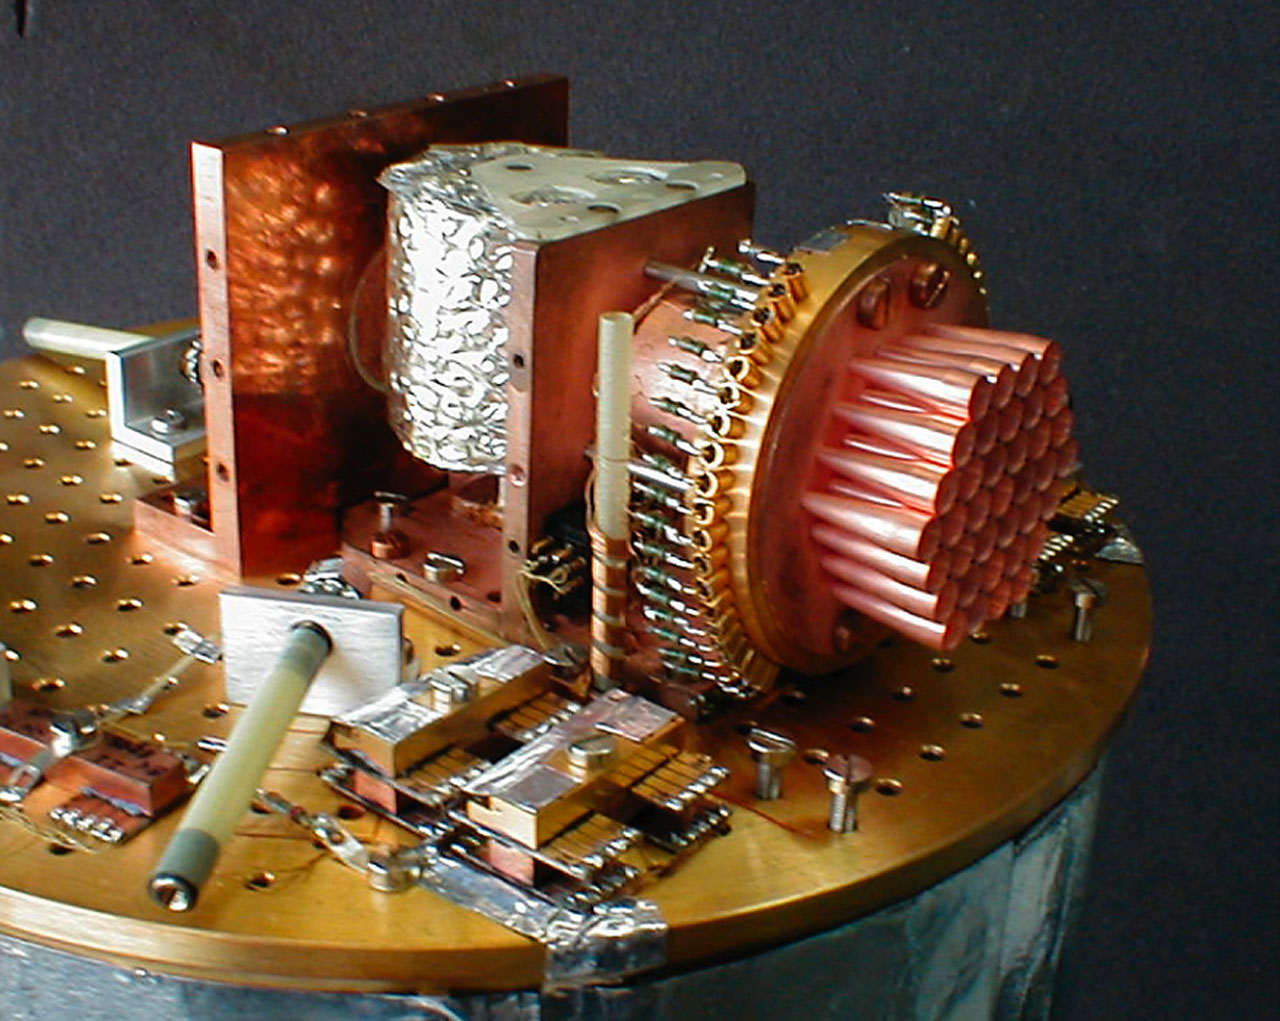 View of the SIMBA instrument